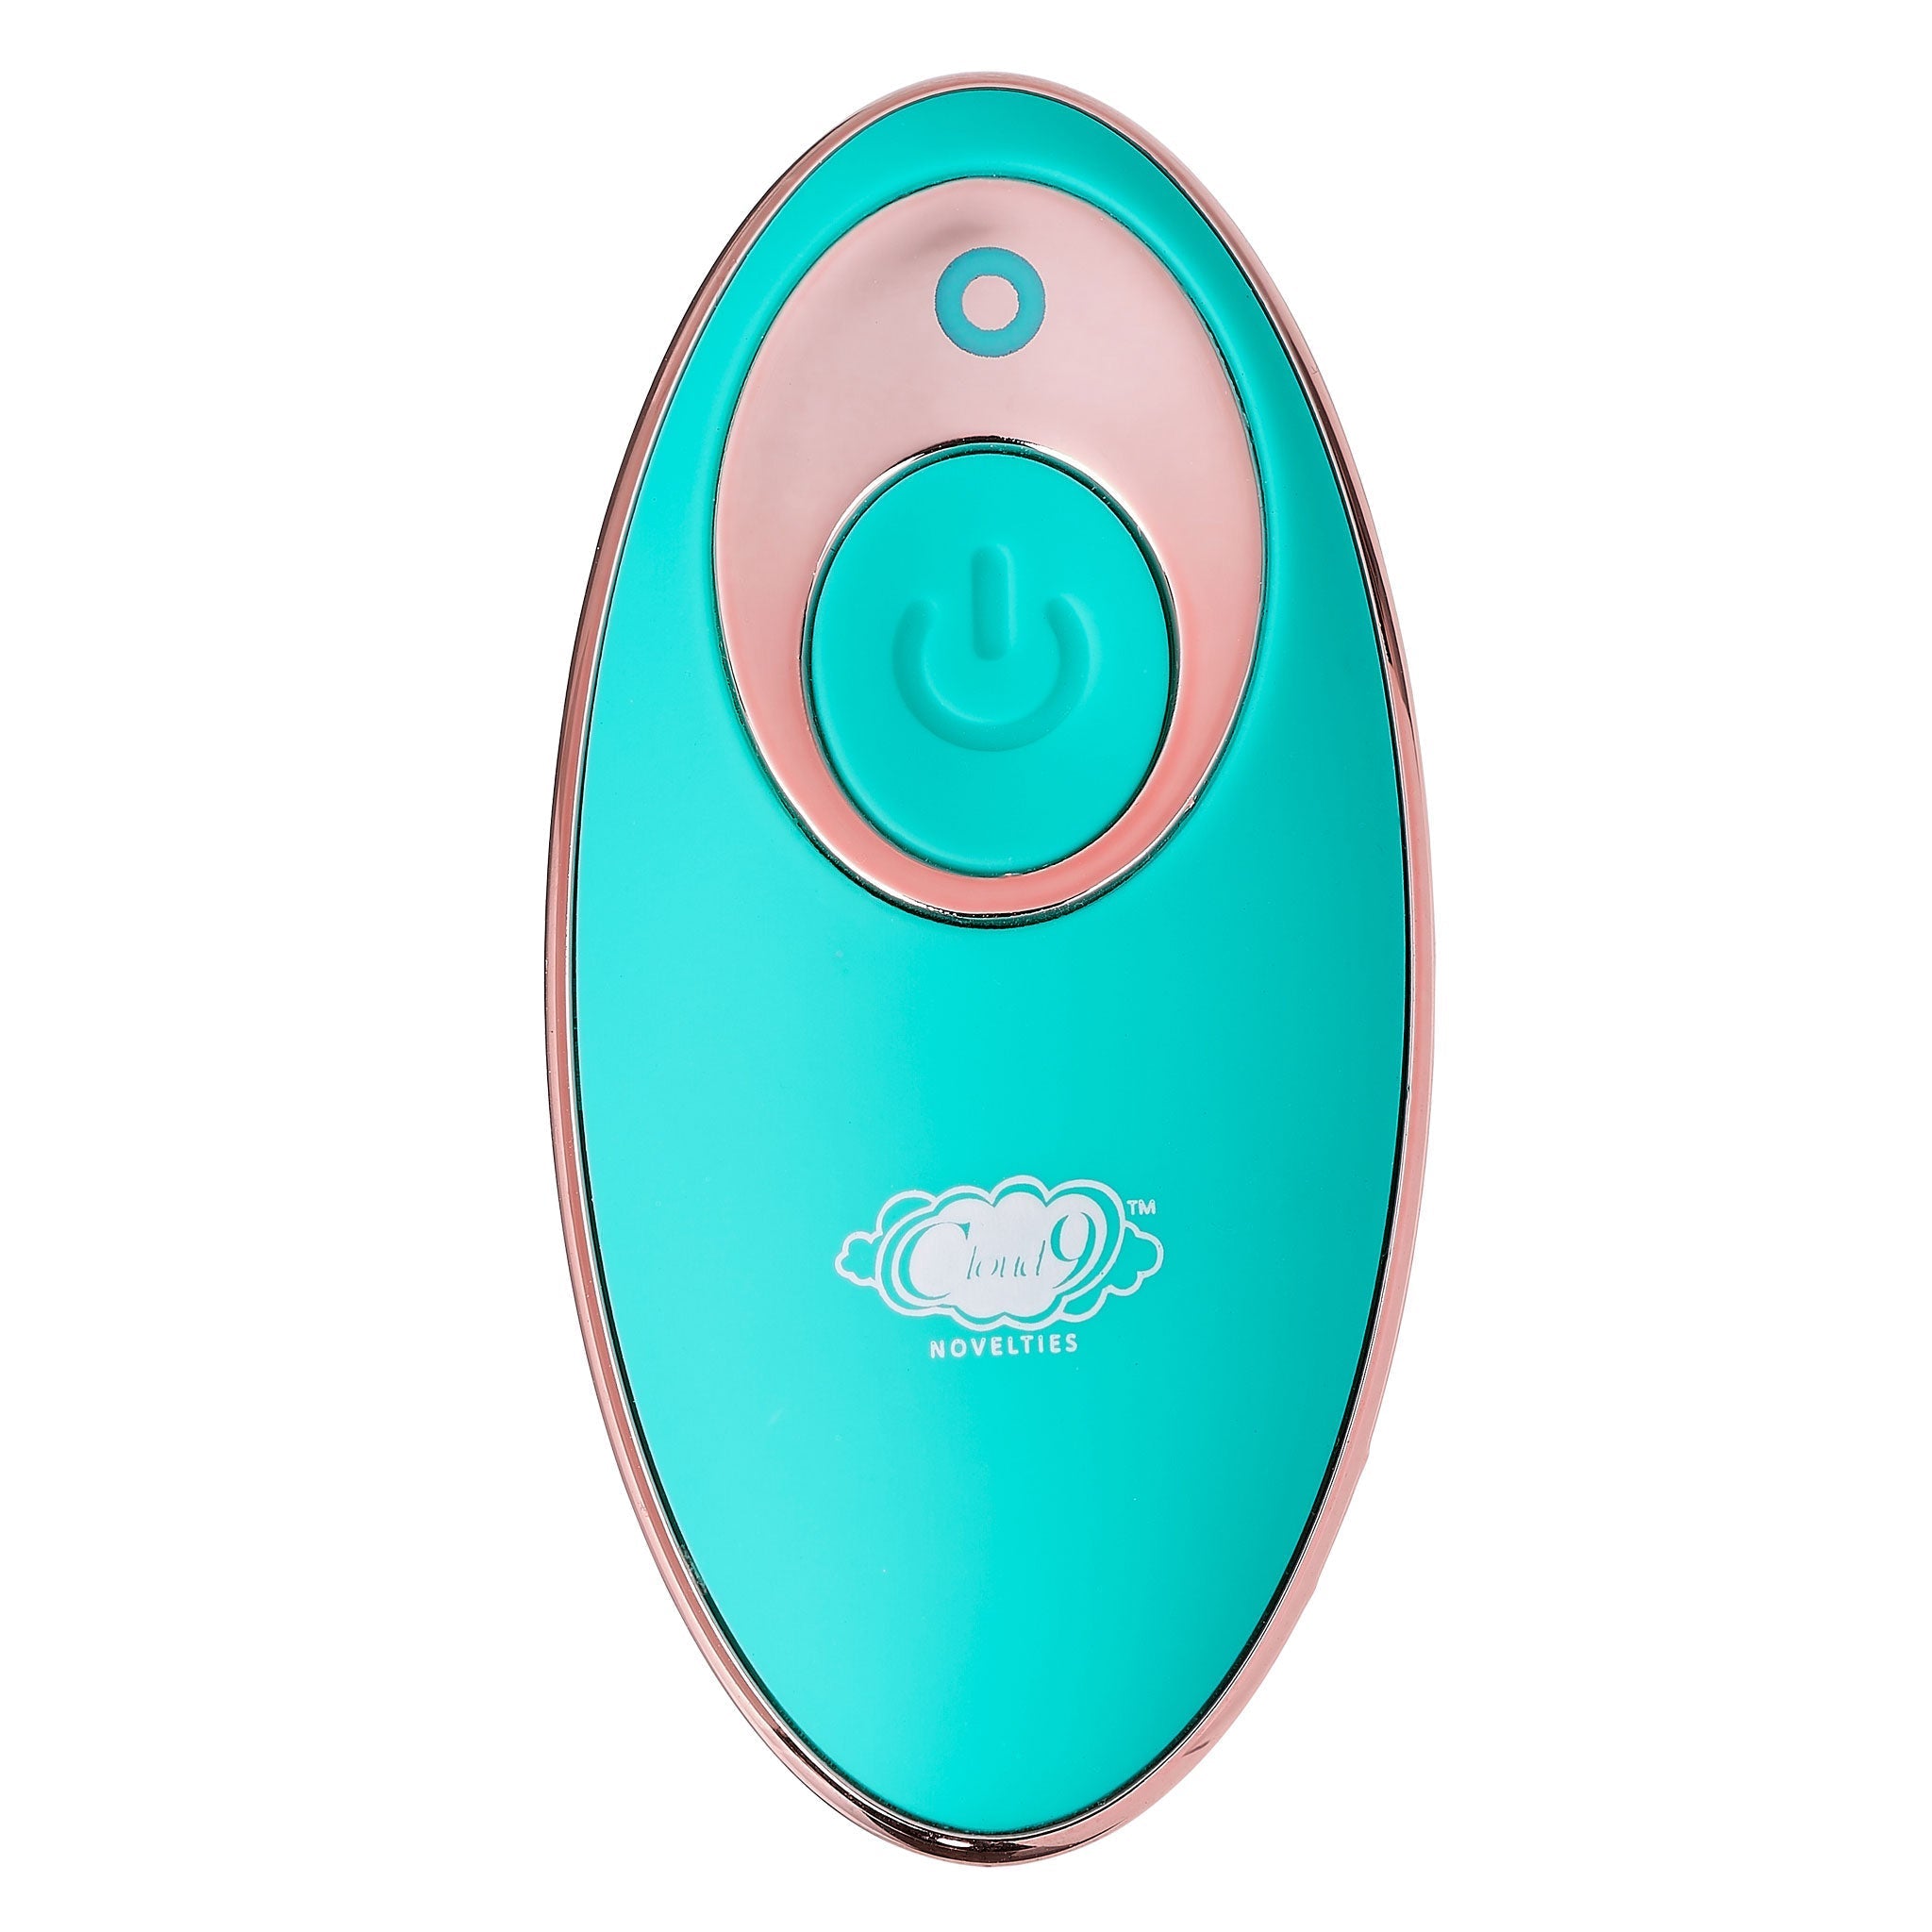 Cloud 9 Health & Wellness Wireless Remote Control Egg W/ Stroking Motion Teal Stroking Motion